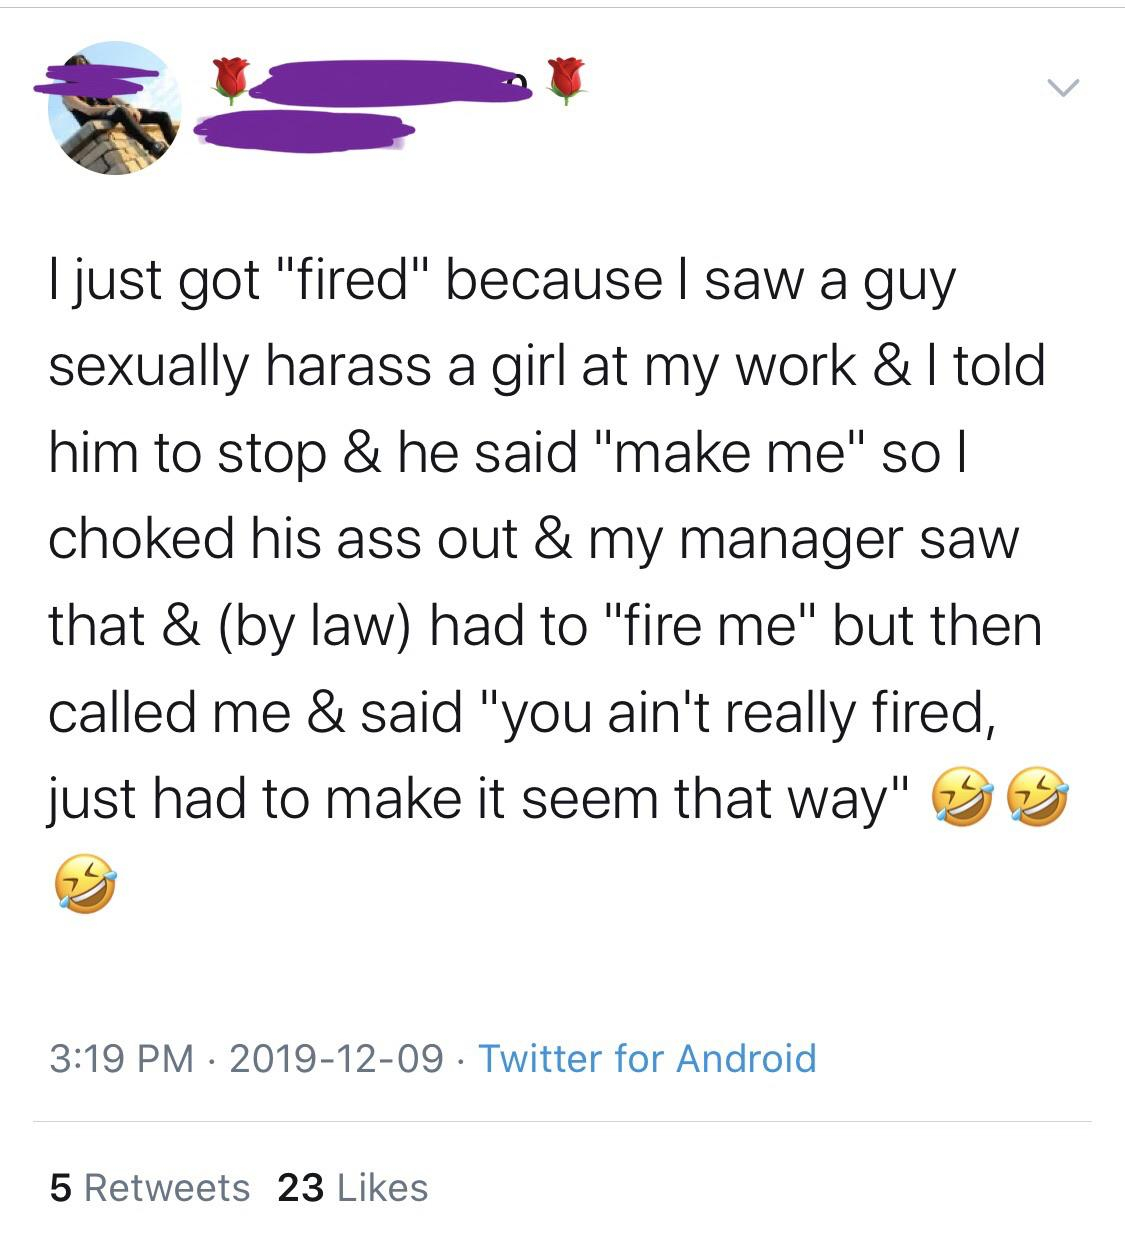 point - I just got "fired" because I saw a guy sexually harass a girl at my work & I told him to stop & he said "make me" so | choked his ass out & my manager saw that & by law had to "fire me" but then called me & said "you ain't really fired, just had t